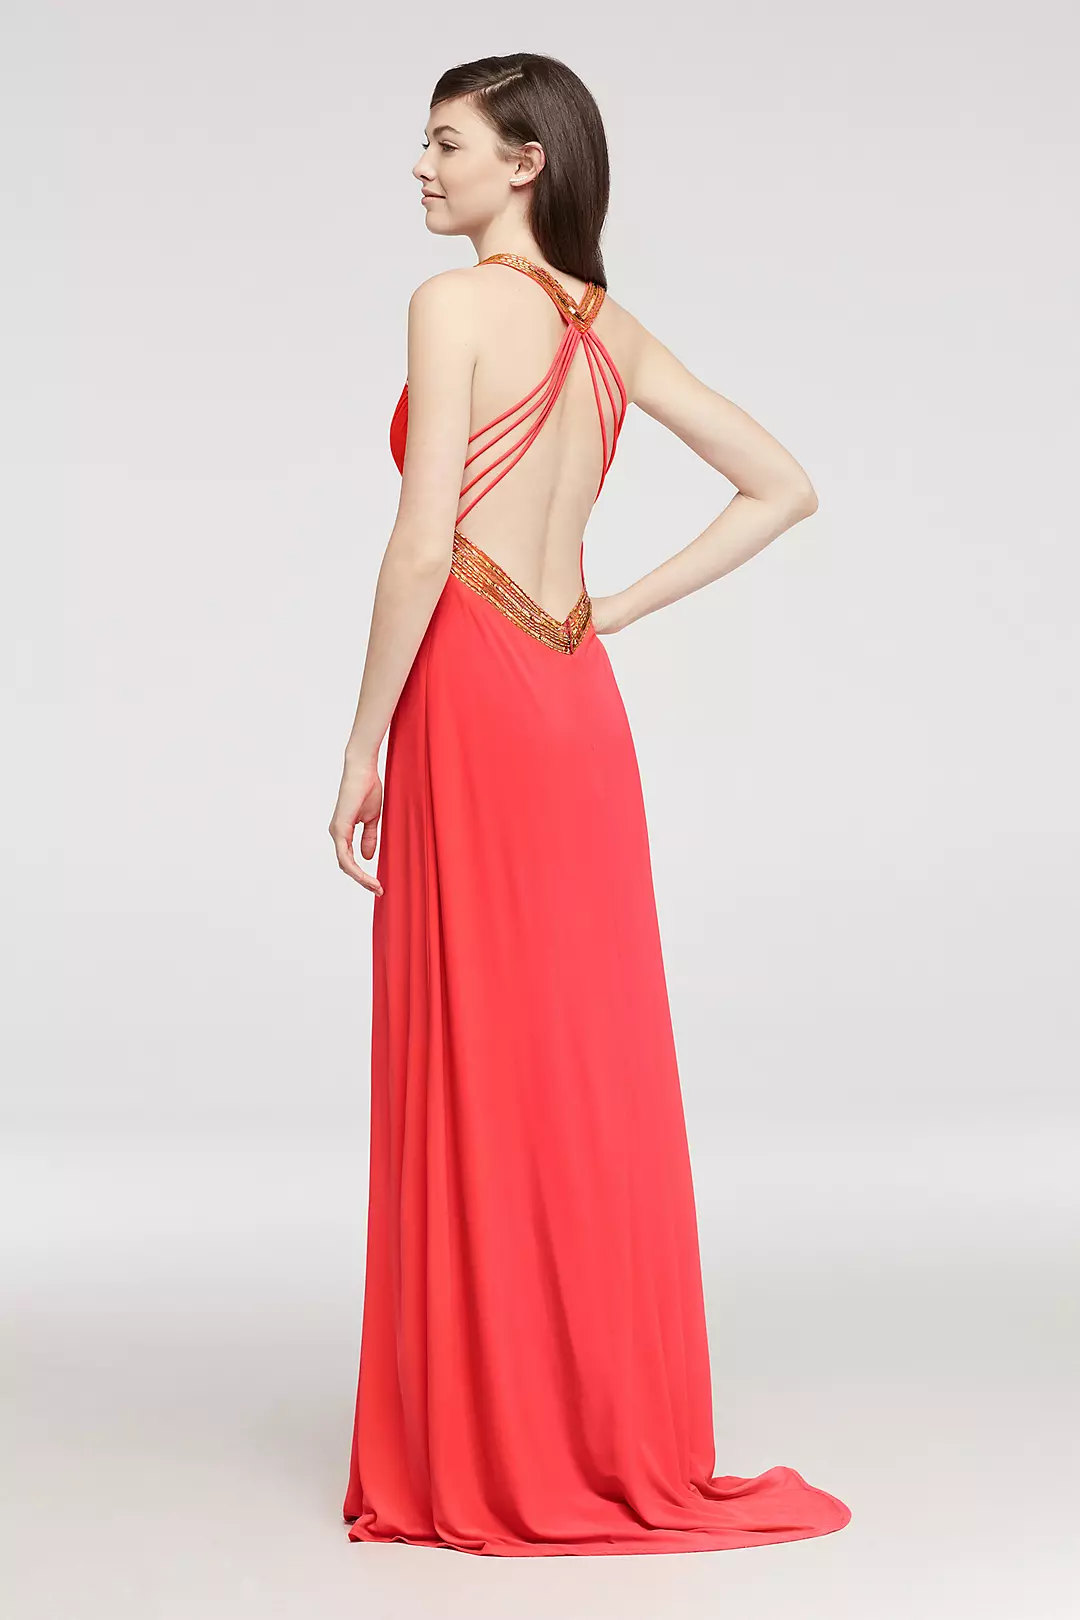 Beaded Halter Jersey Prom Dress with Open Back  Image 2